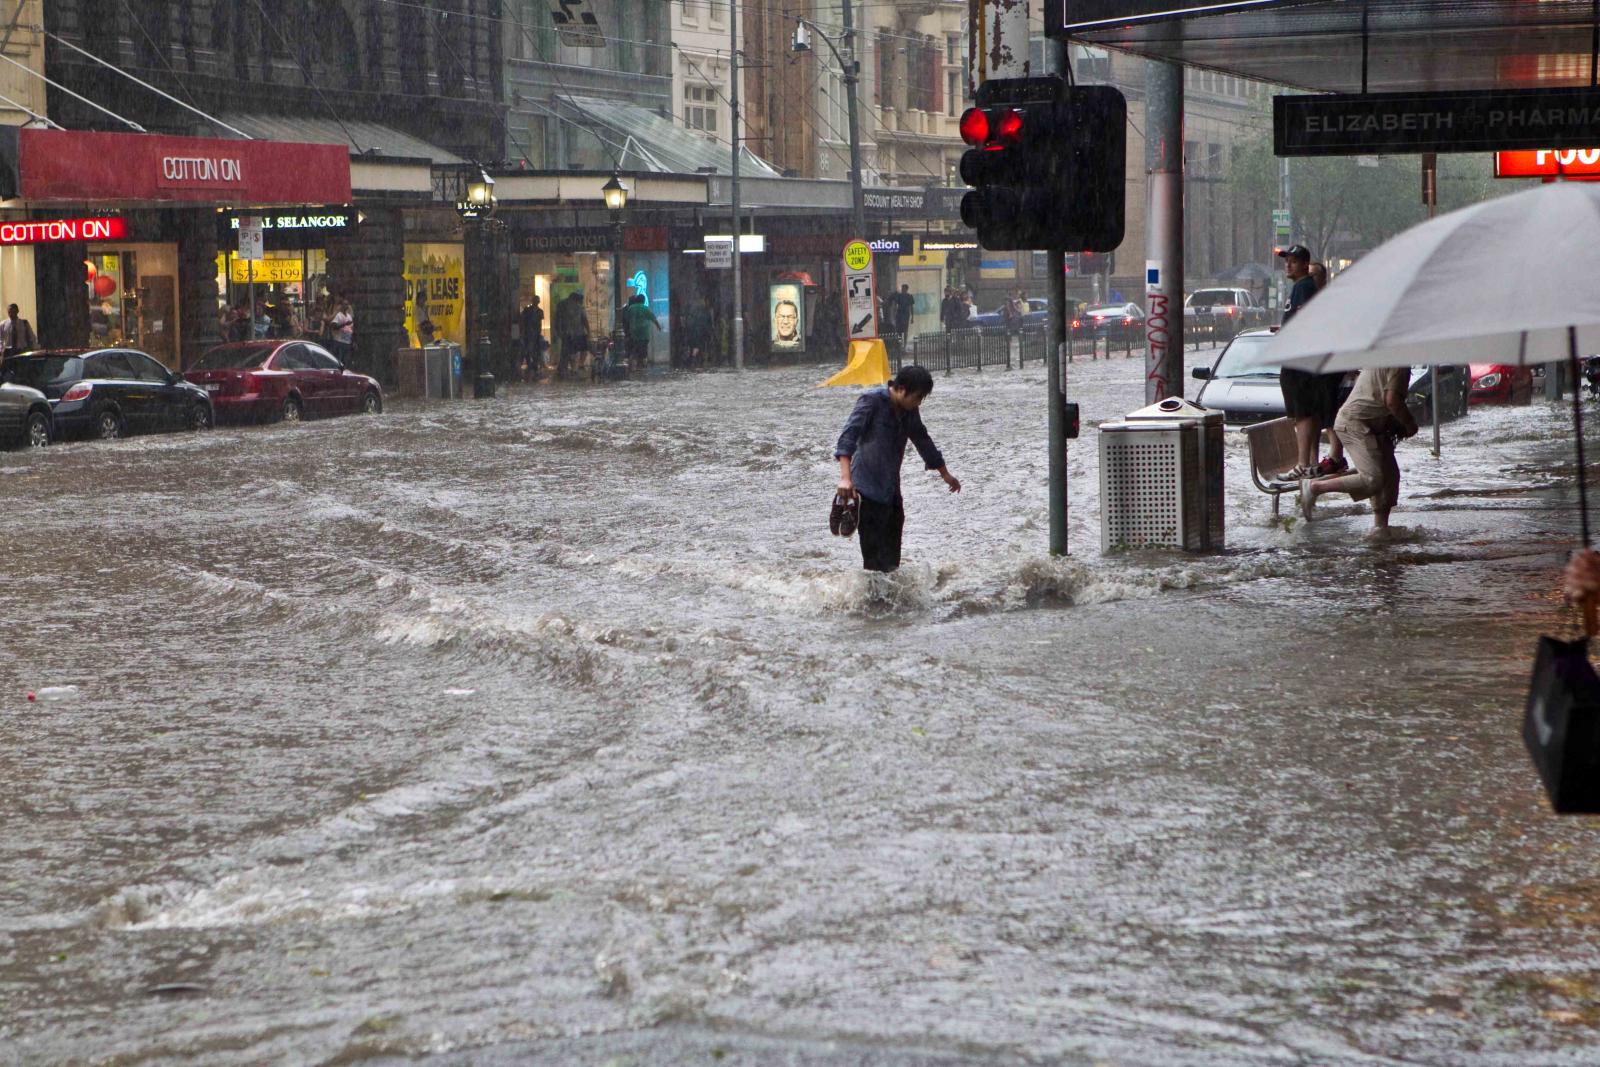 Melbourne during a storm in 2010. Photo: Ben Houdijk (CC-by-nc-nd-2.0)